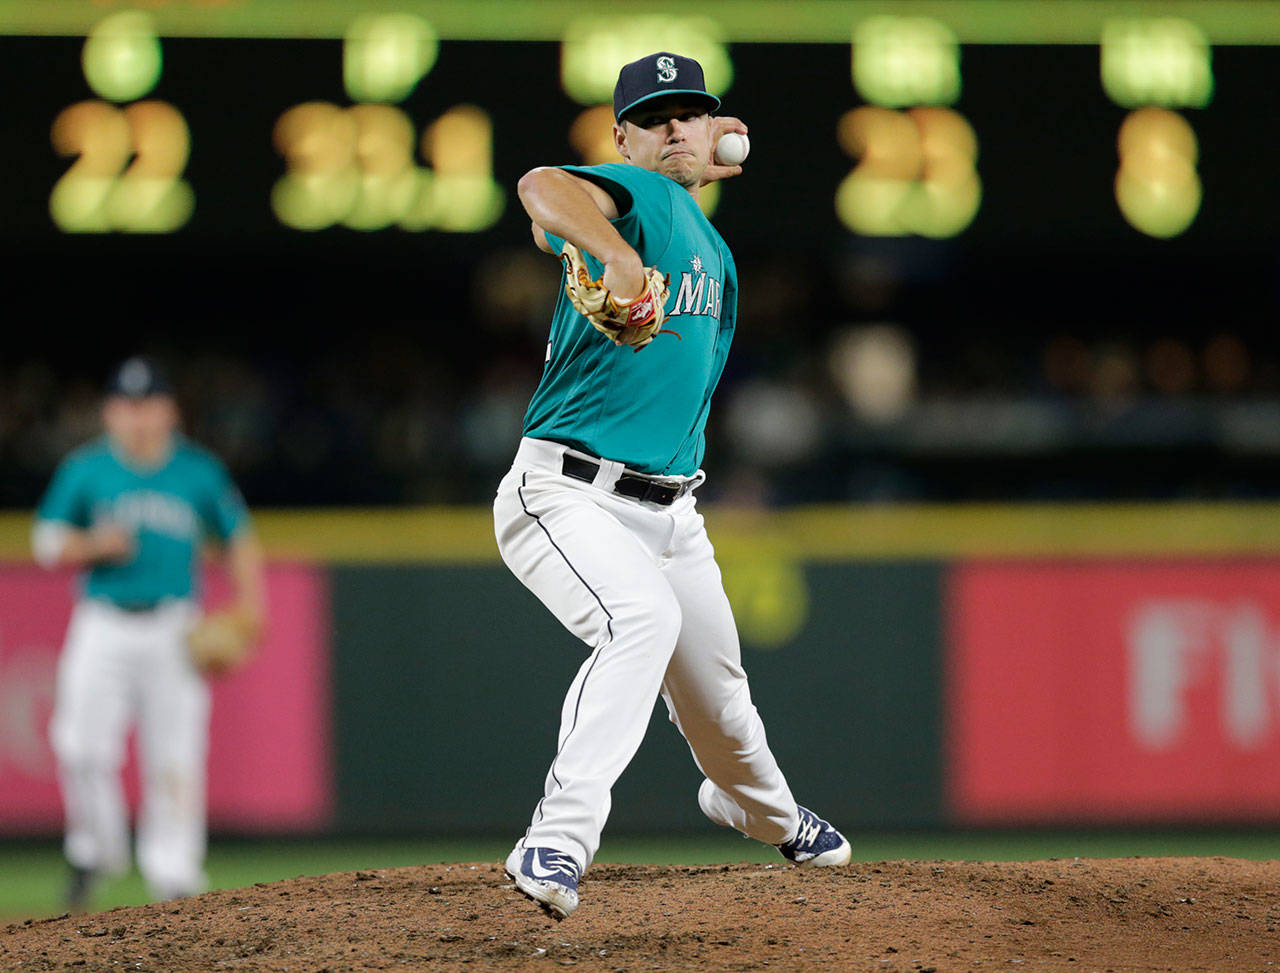 Mariners pitcher Marco Gonzales works against the Royals during a game on June 29, 2018, in Seattle. (AP Photo/John Froschauer)